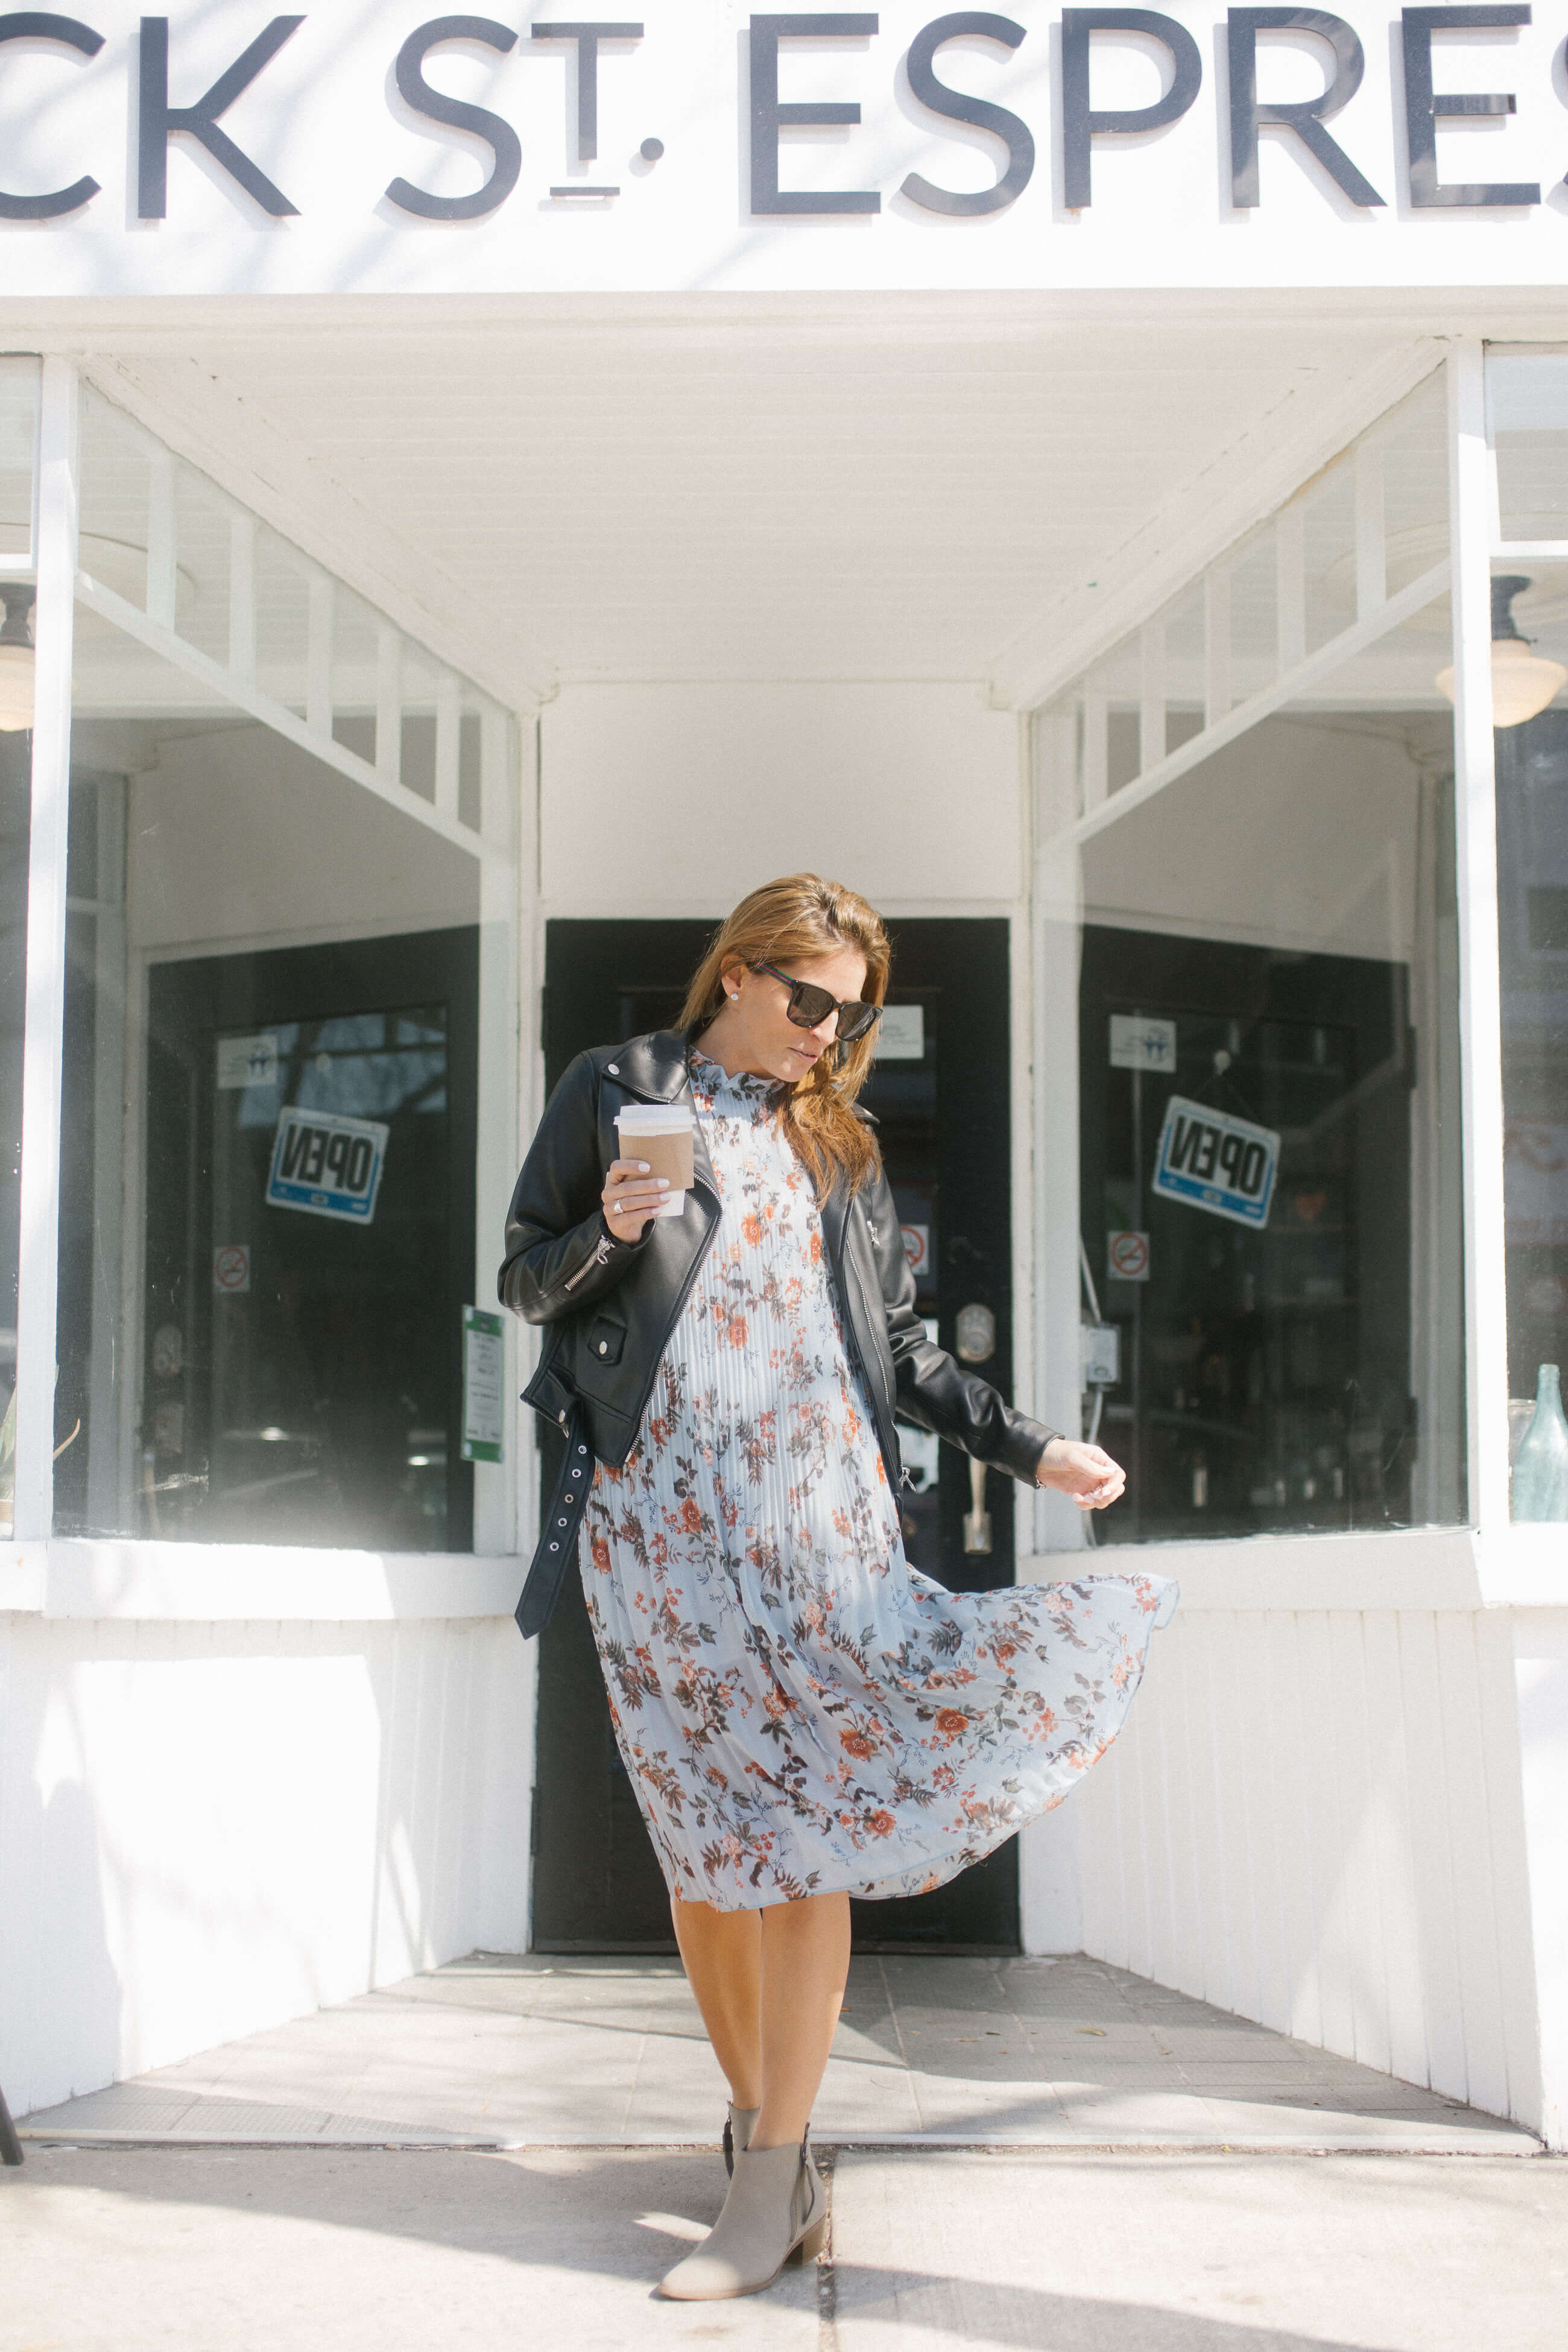 Floral maxi dress with a leather jacket; gucci sunglasses; Brock Street Espresso; mandy furnis sparkleshinylove; whitby blogger